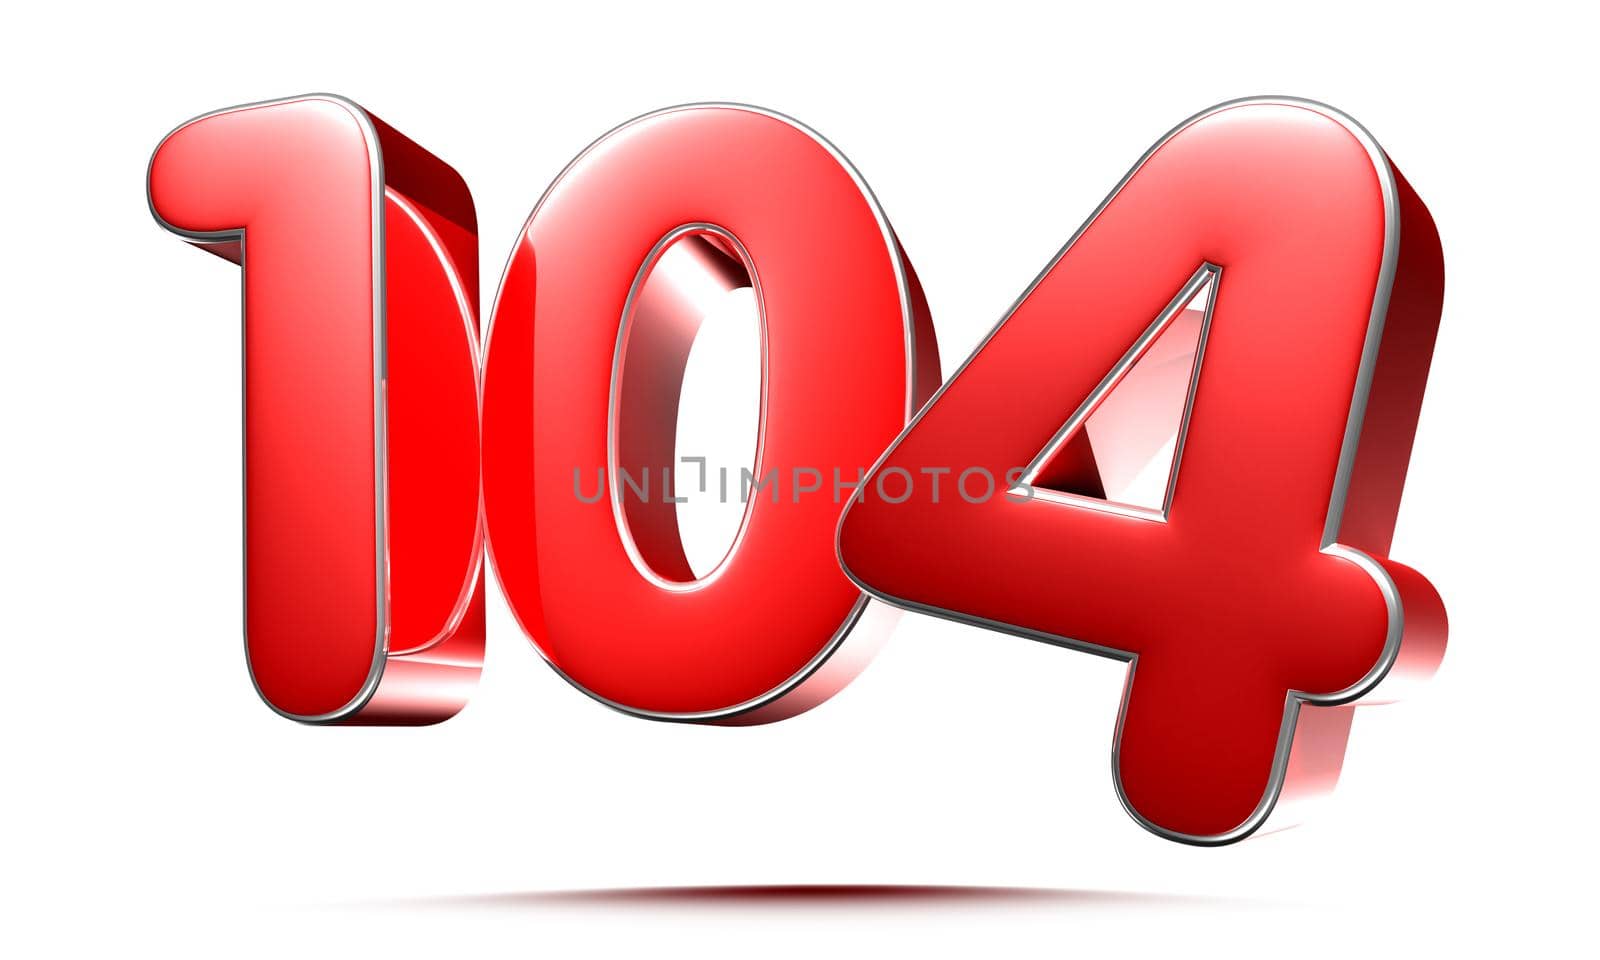 Rounded red numbers 104 on white background 3D illustration with clipping path by thitimontoyai